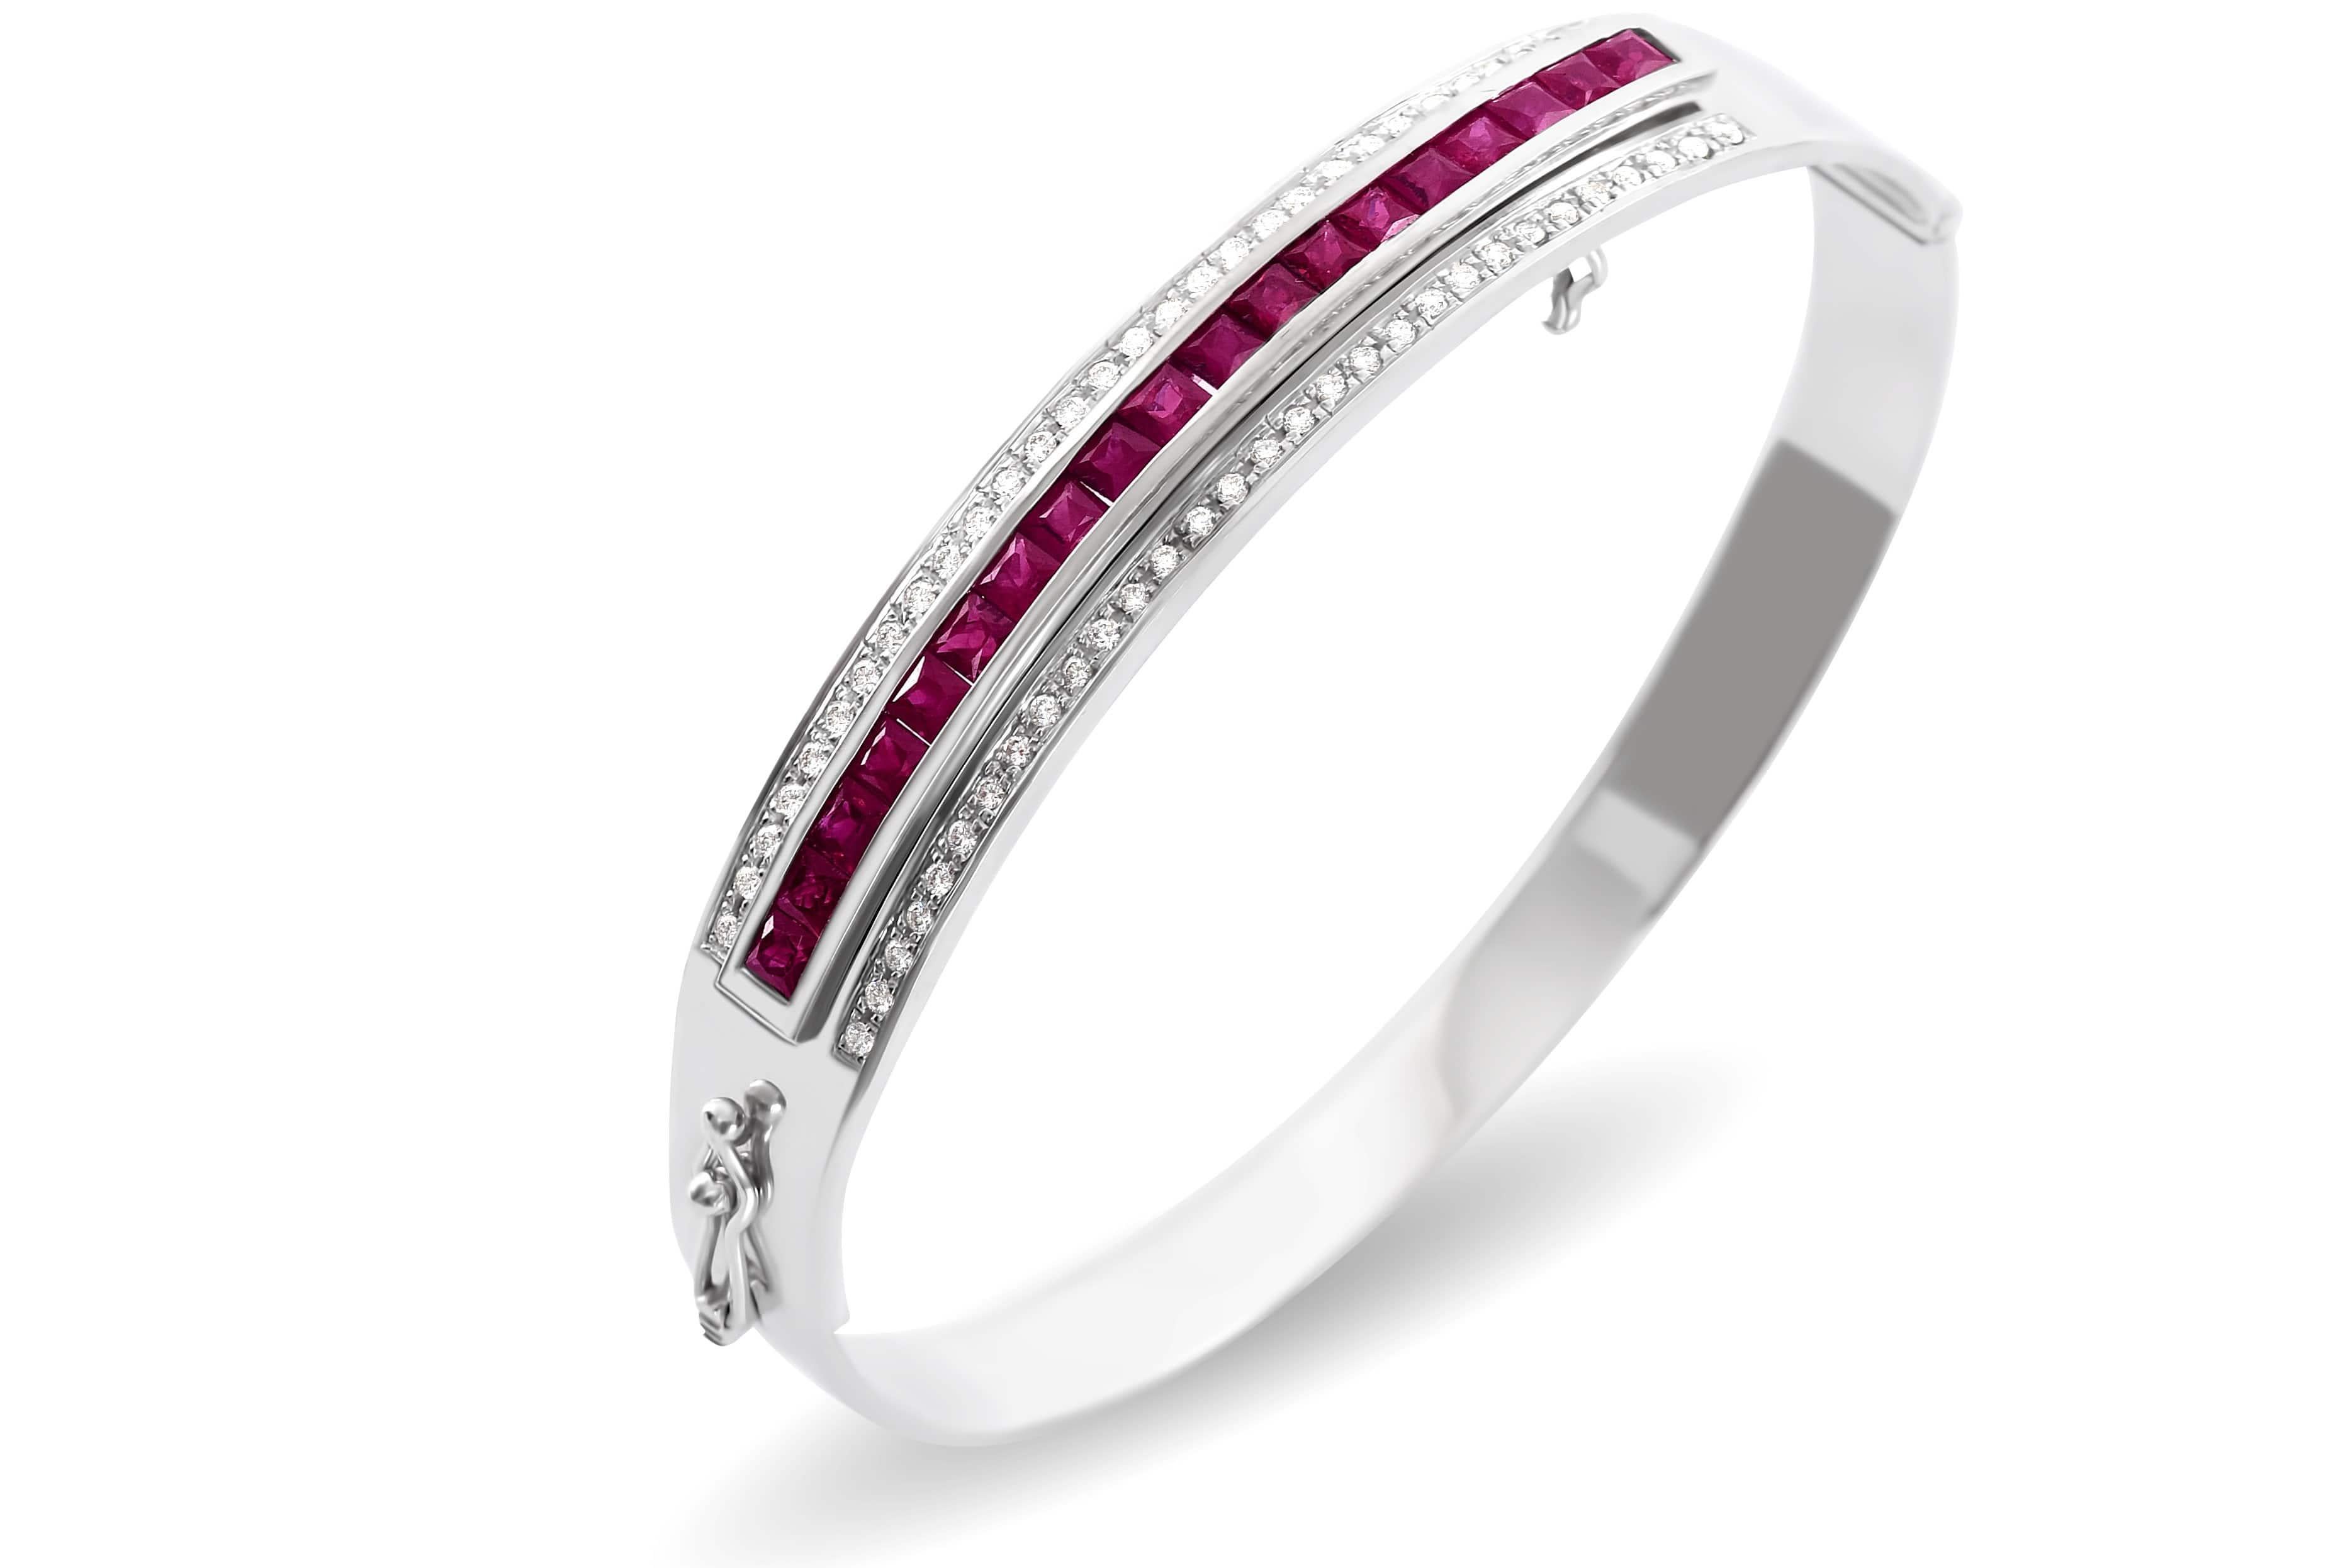 This decadent piece features the highest quality brilliant cut diamonds set in solid 18k white gold in an elegant hinged oval bangle. The featured gemstone insert of your choice is interchangeable, set with magnificent hand selected, calibrated blue